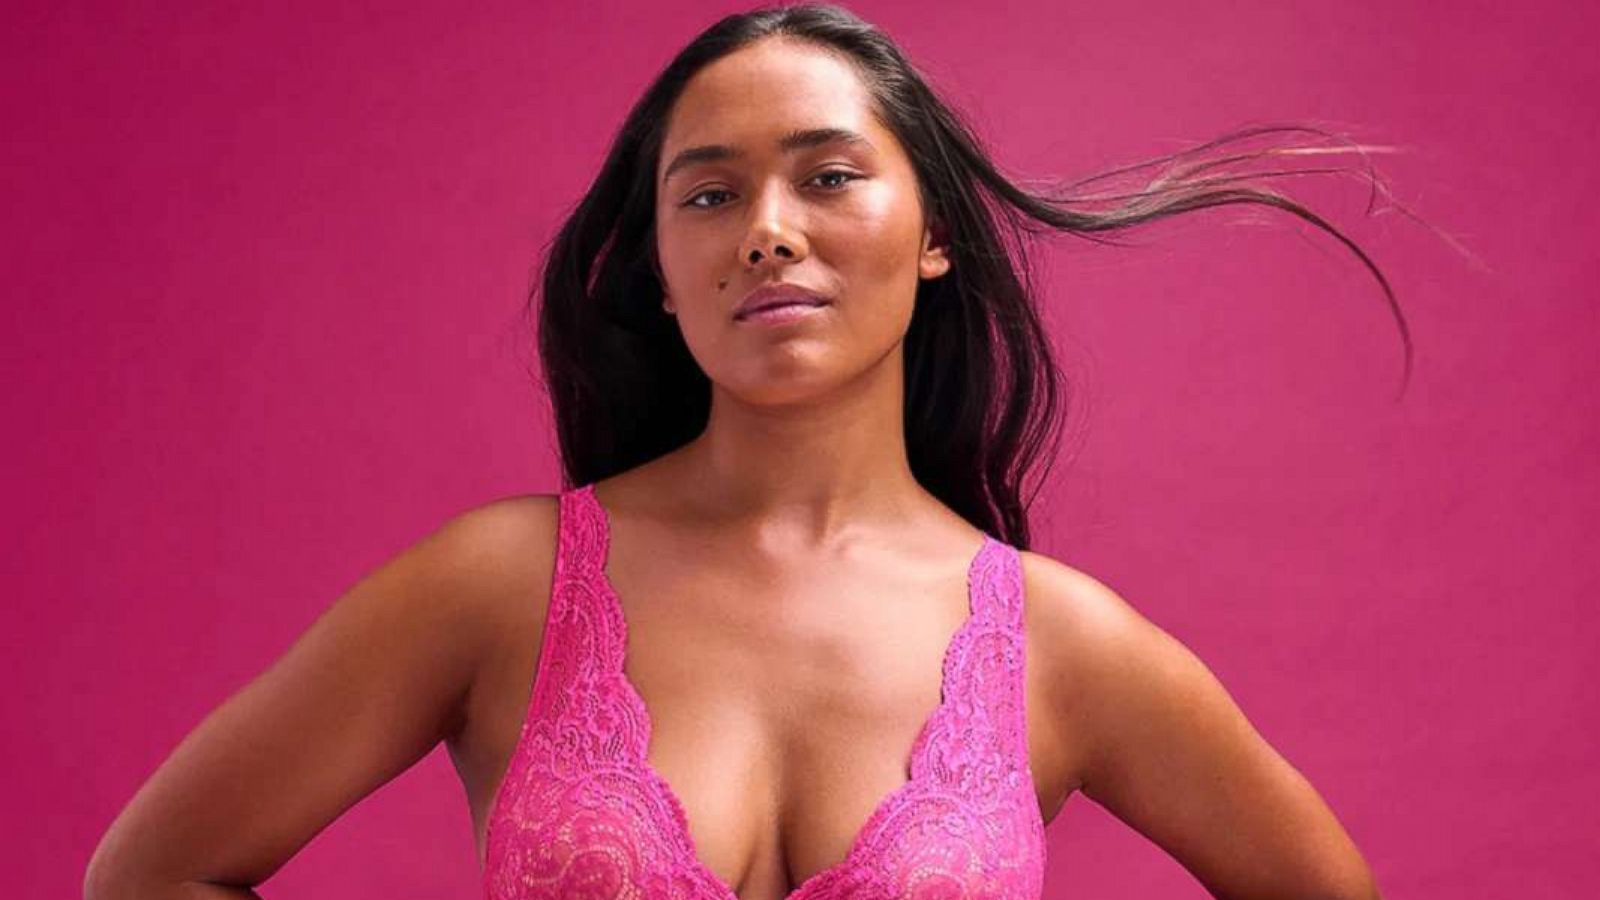 Third Love: Ready to say goodbye to bad bras?